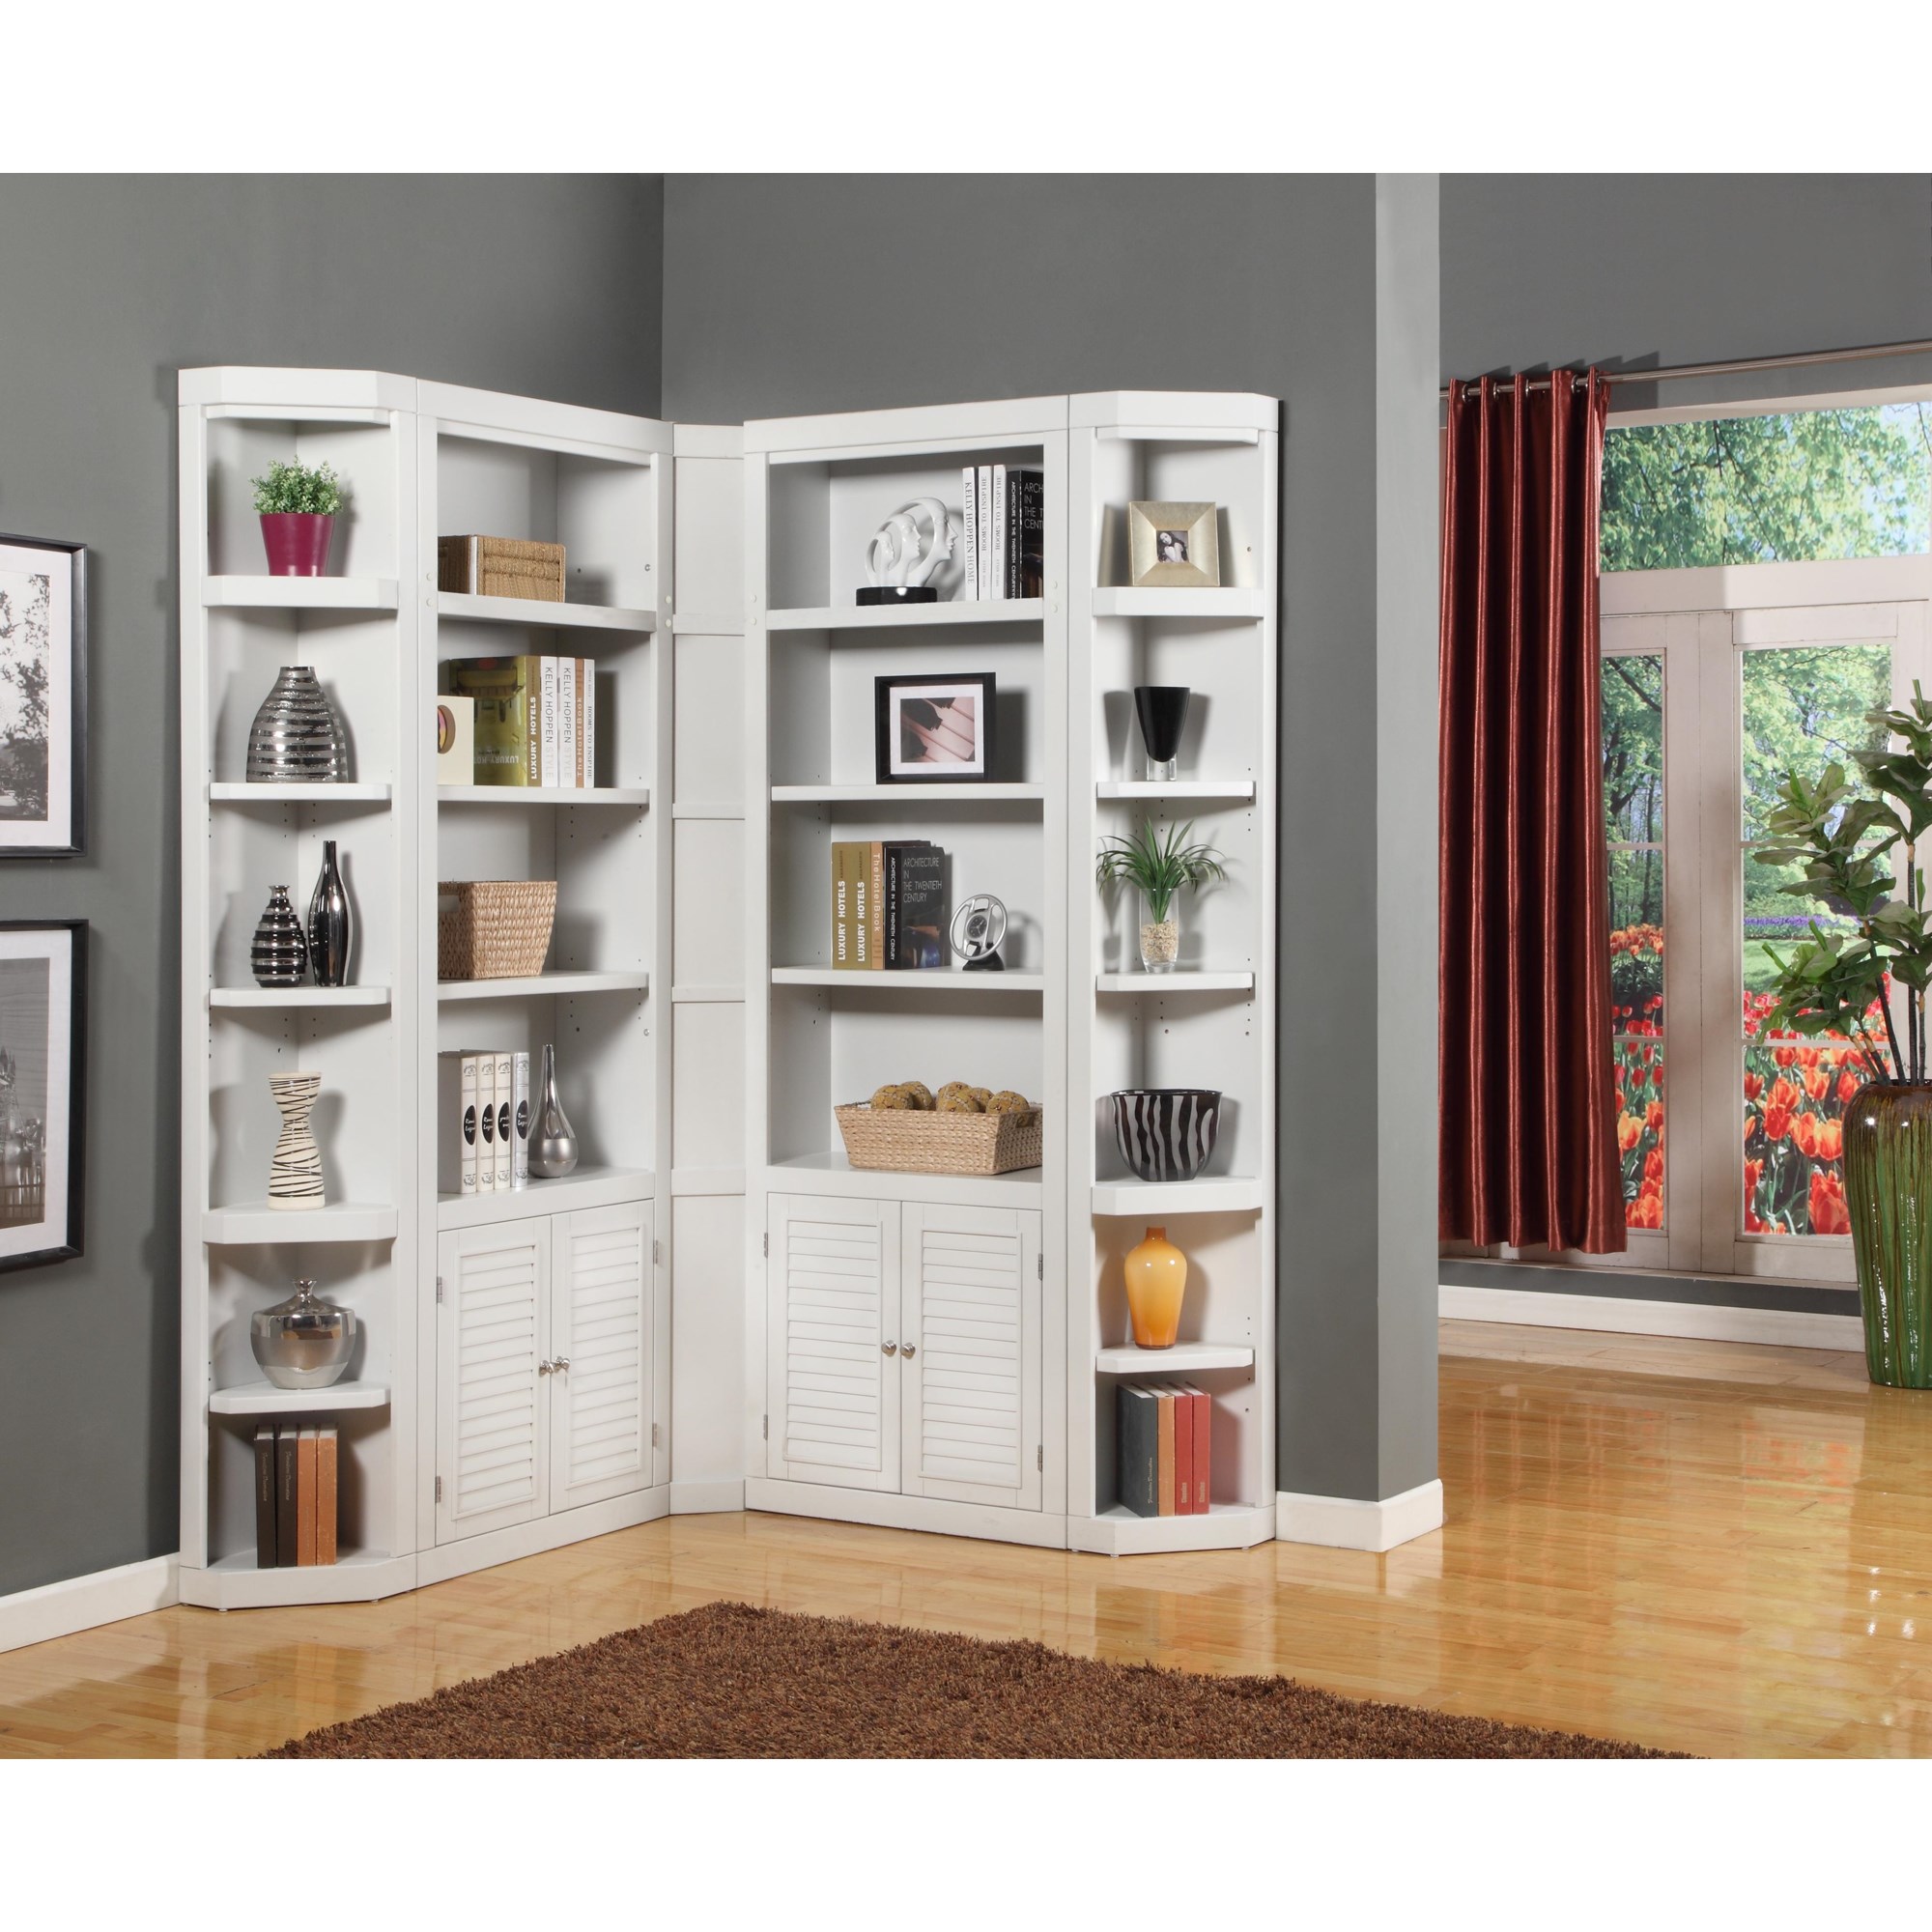 15 Best Small-Space Bookcases - Book Shelves for Small Homes